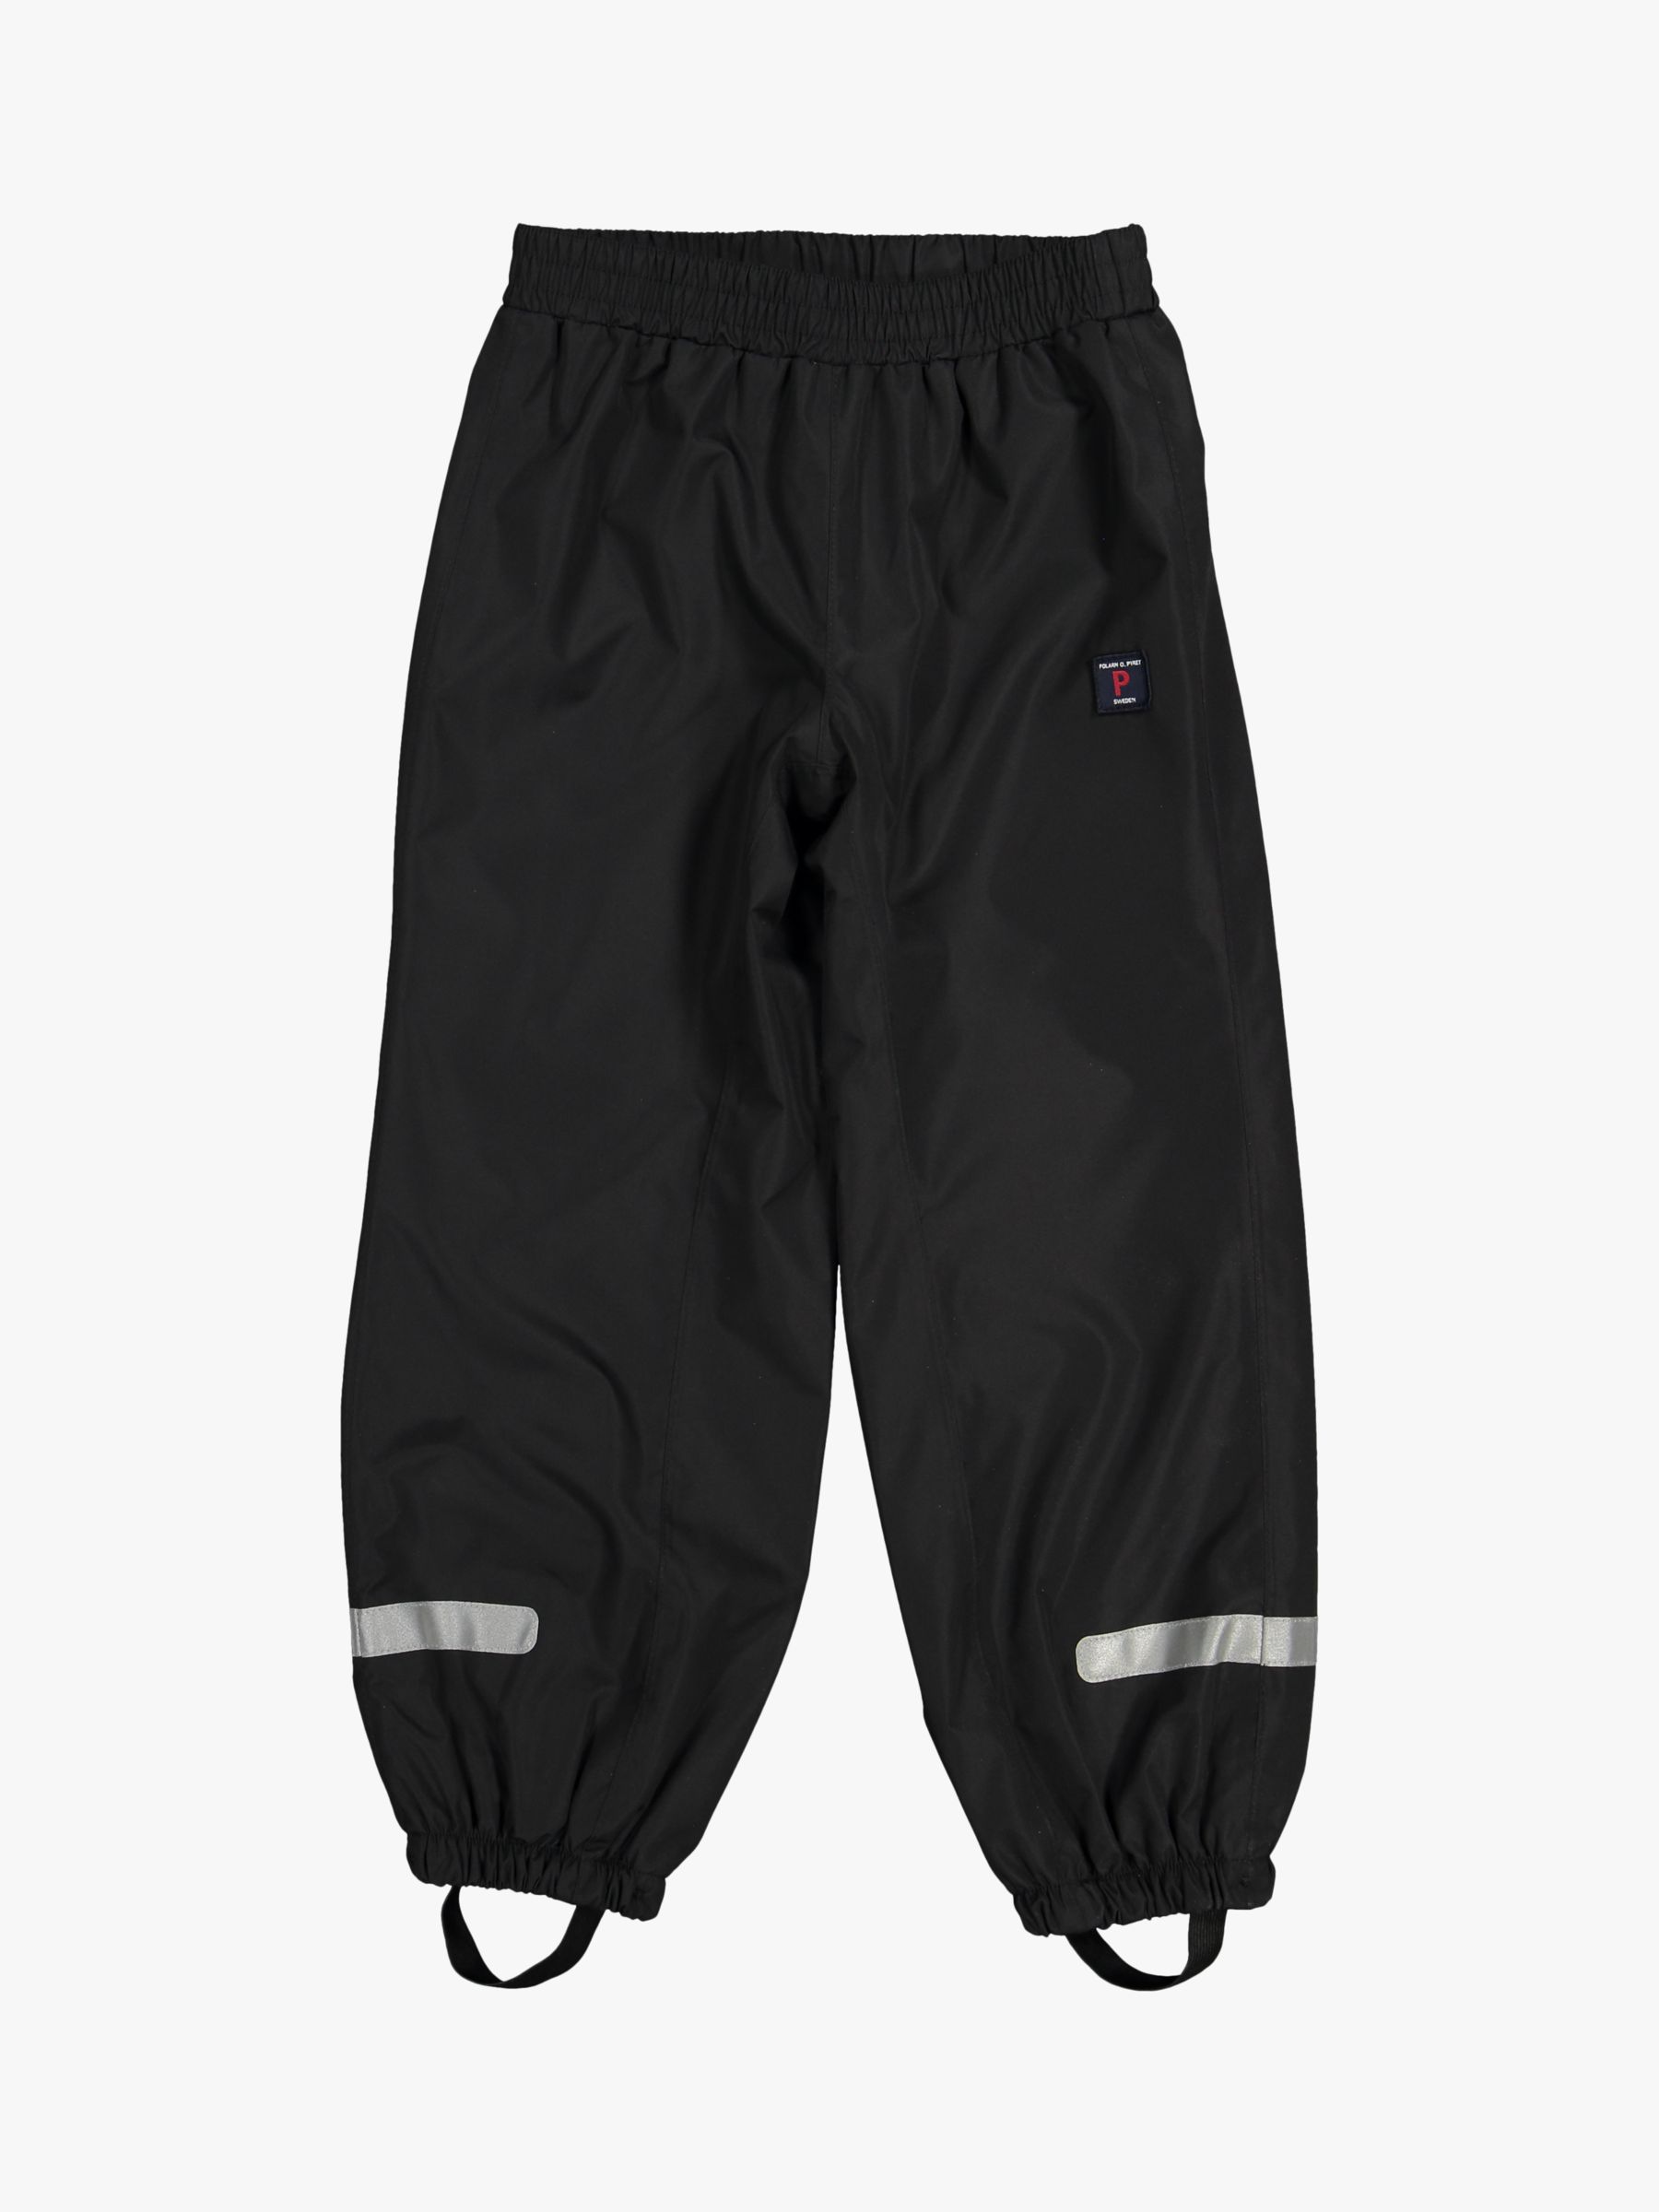 Image of Polarn O Pyret Childrens PullOn Waterproof Shell Trousers Black